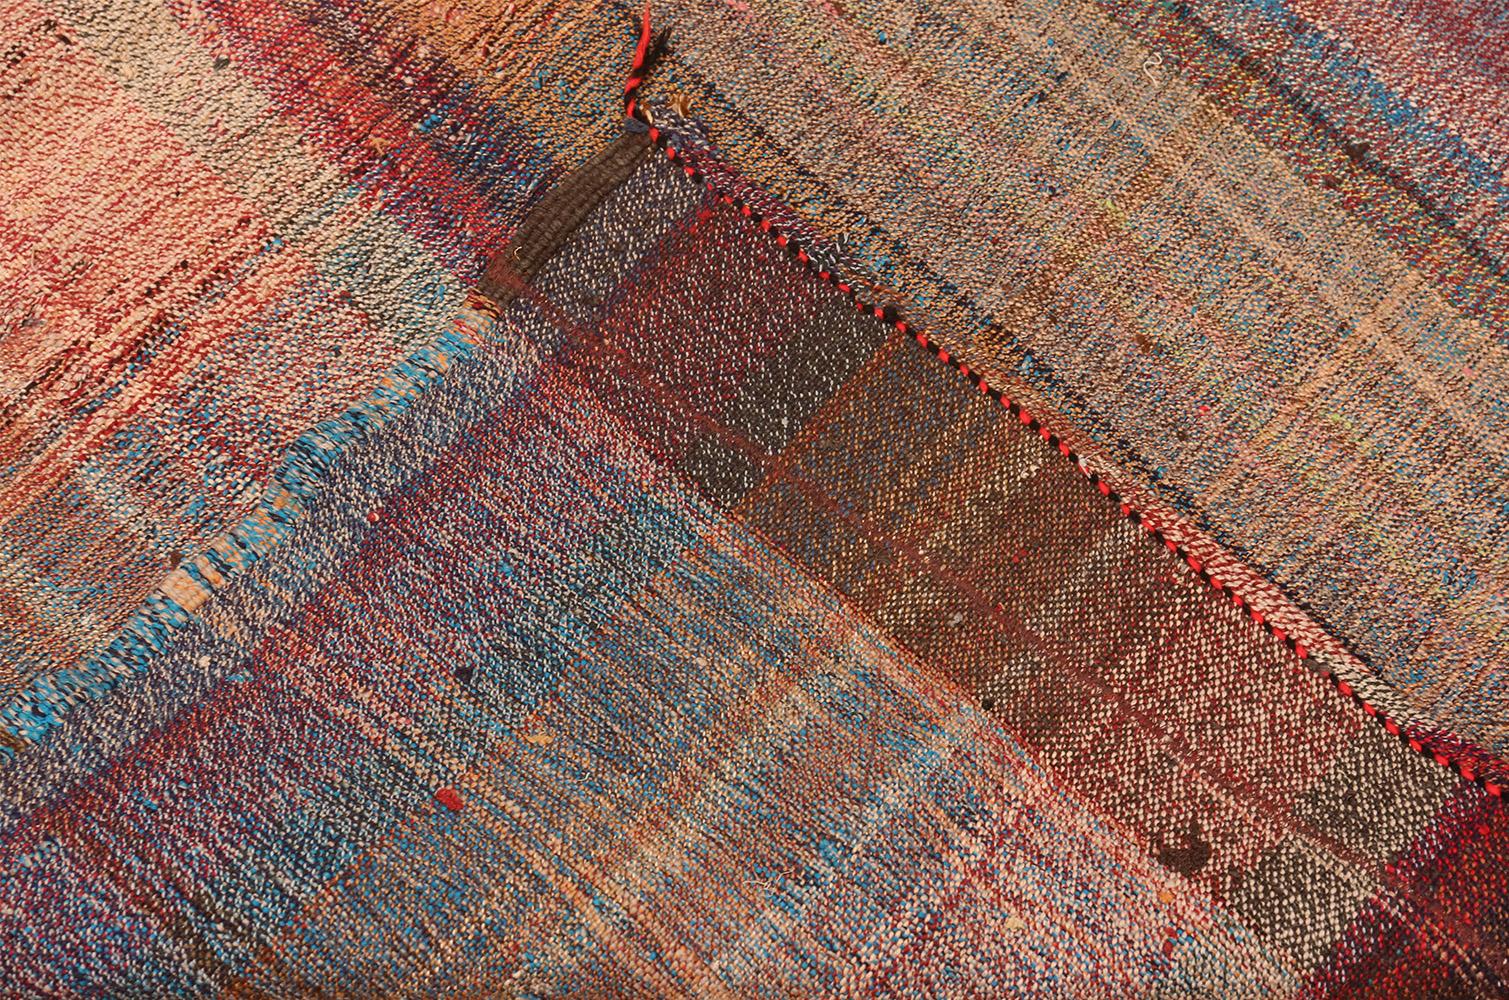 Beautifully Striped Decorative Vintage Persian Kilim Rug. Country of Origin: Vintage Persian / Circa Date: Mid 20th Century - Size: 8 ft 4 in x 11 ft 5 in (2.54 m x 3.48 m).